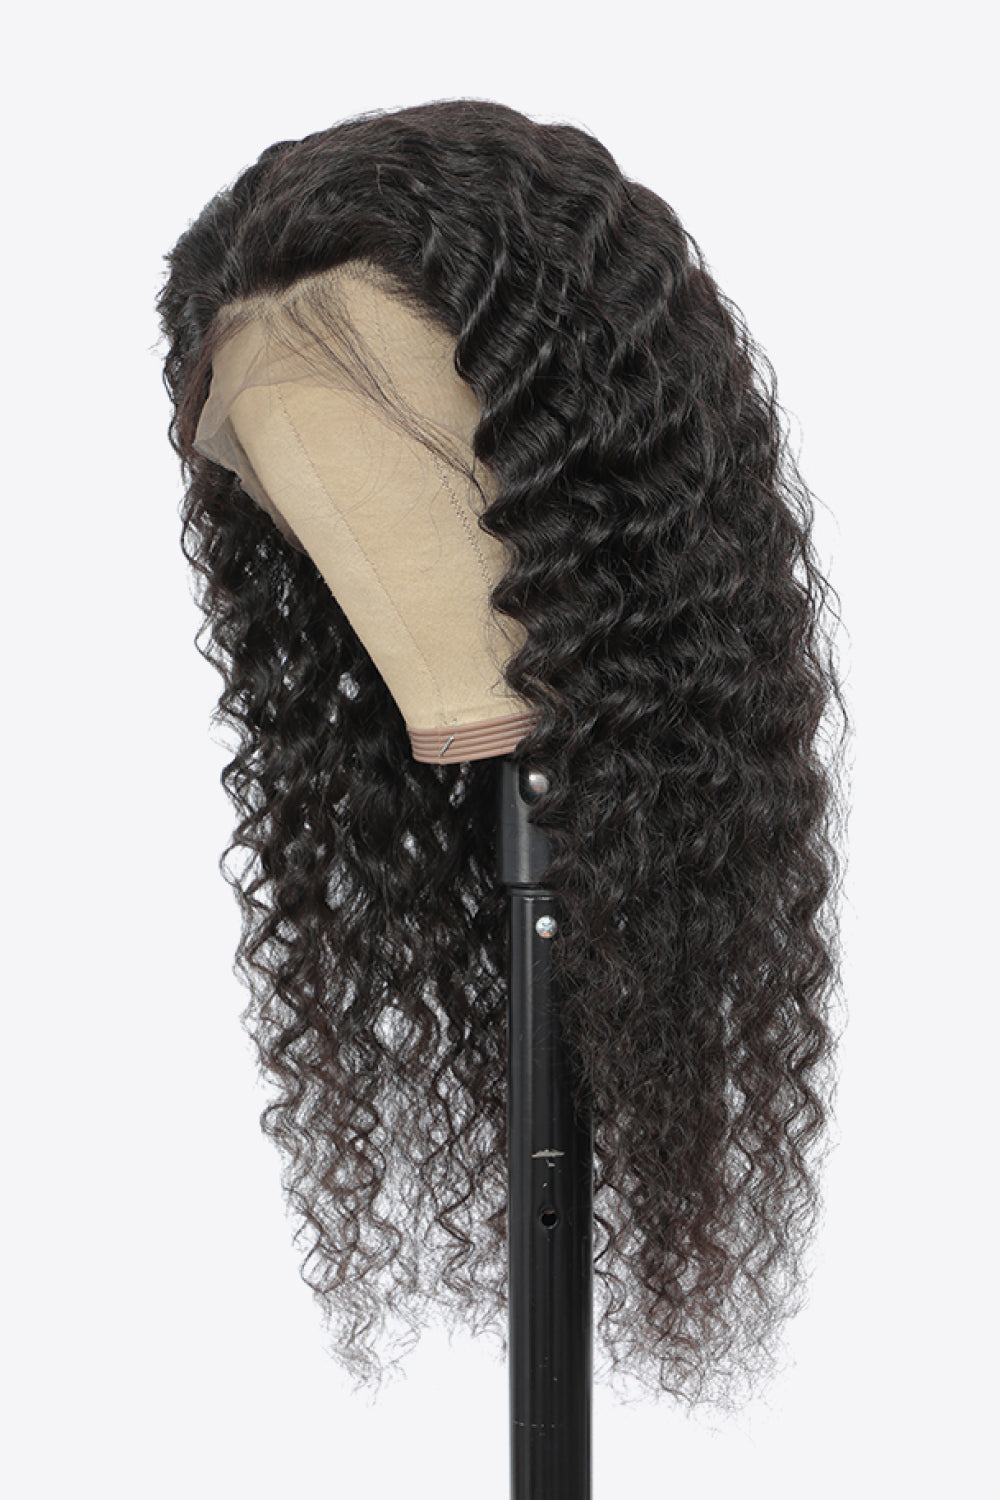 20” 13x4“ Lace Front Wigs Human Hair Curly Natural Color 150% Density by TC